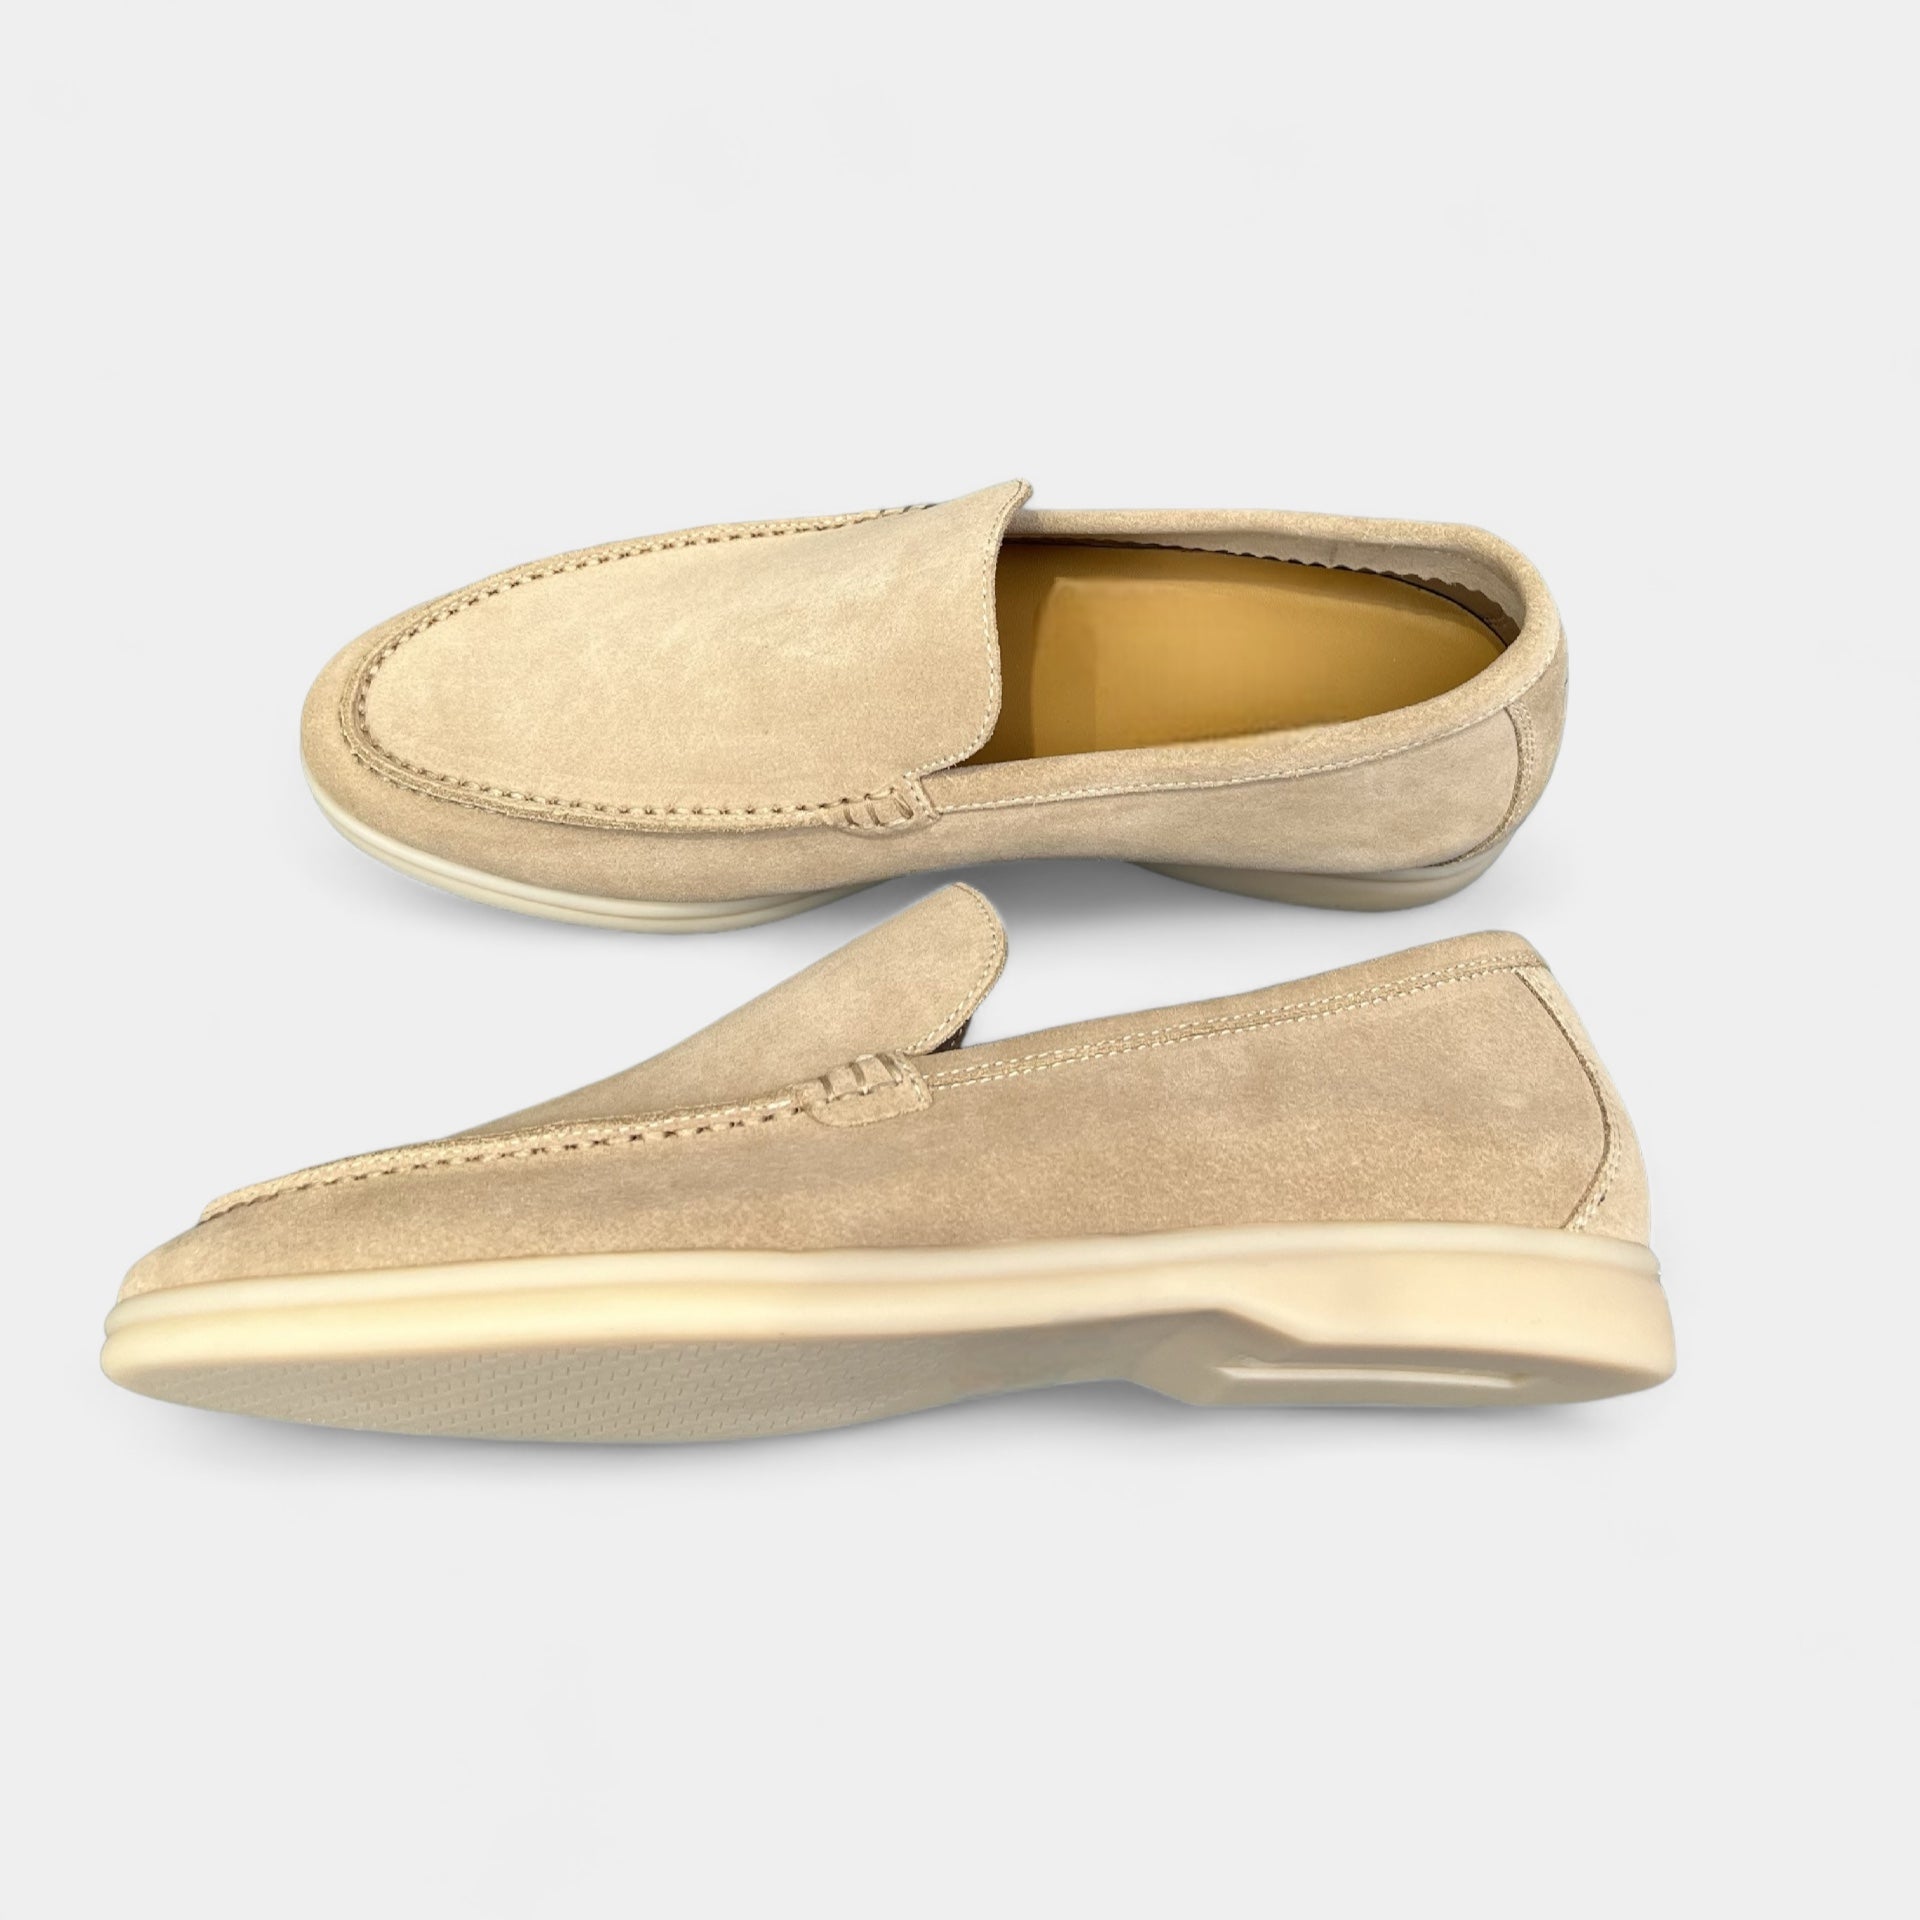 OLD MONEY SUEDE Loafers - WEAR OLD MONEY